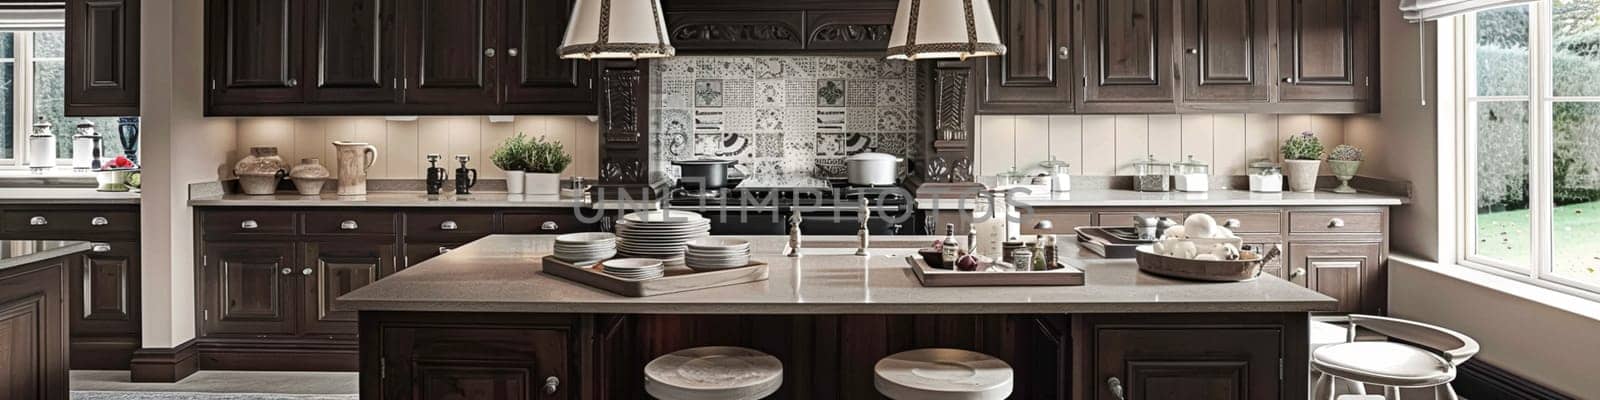 Bespoke kitchen design, country house and cottage interior design, English countryside style renovation and home decor idea by Anneleven